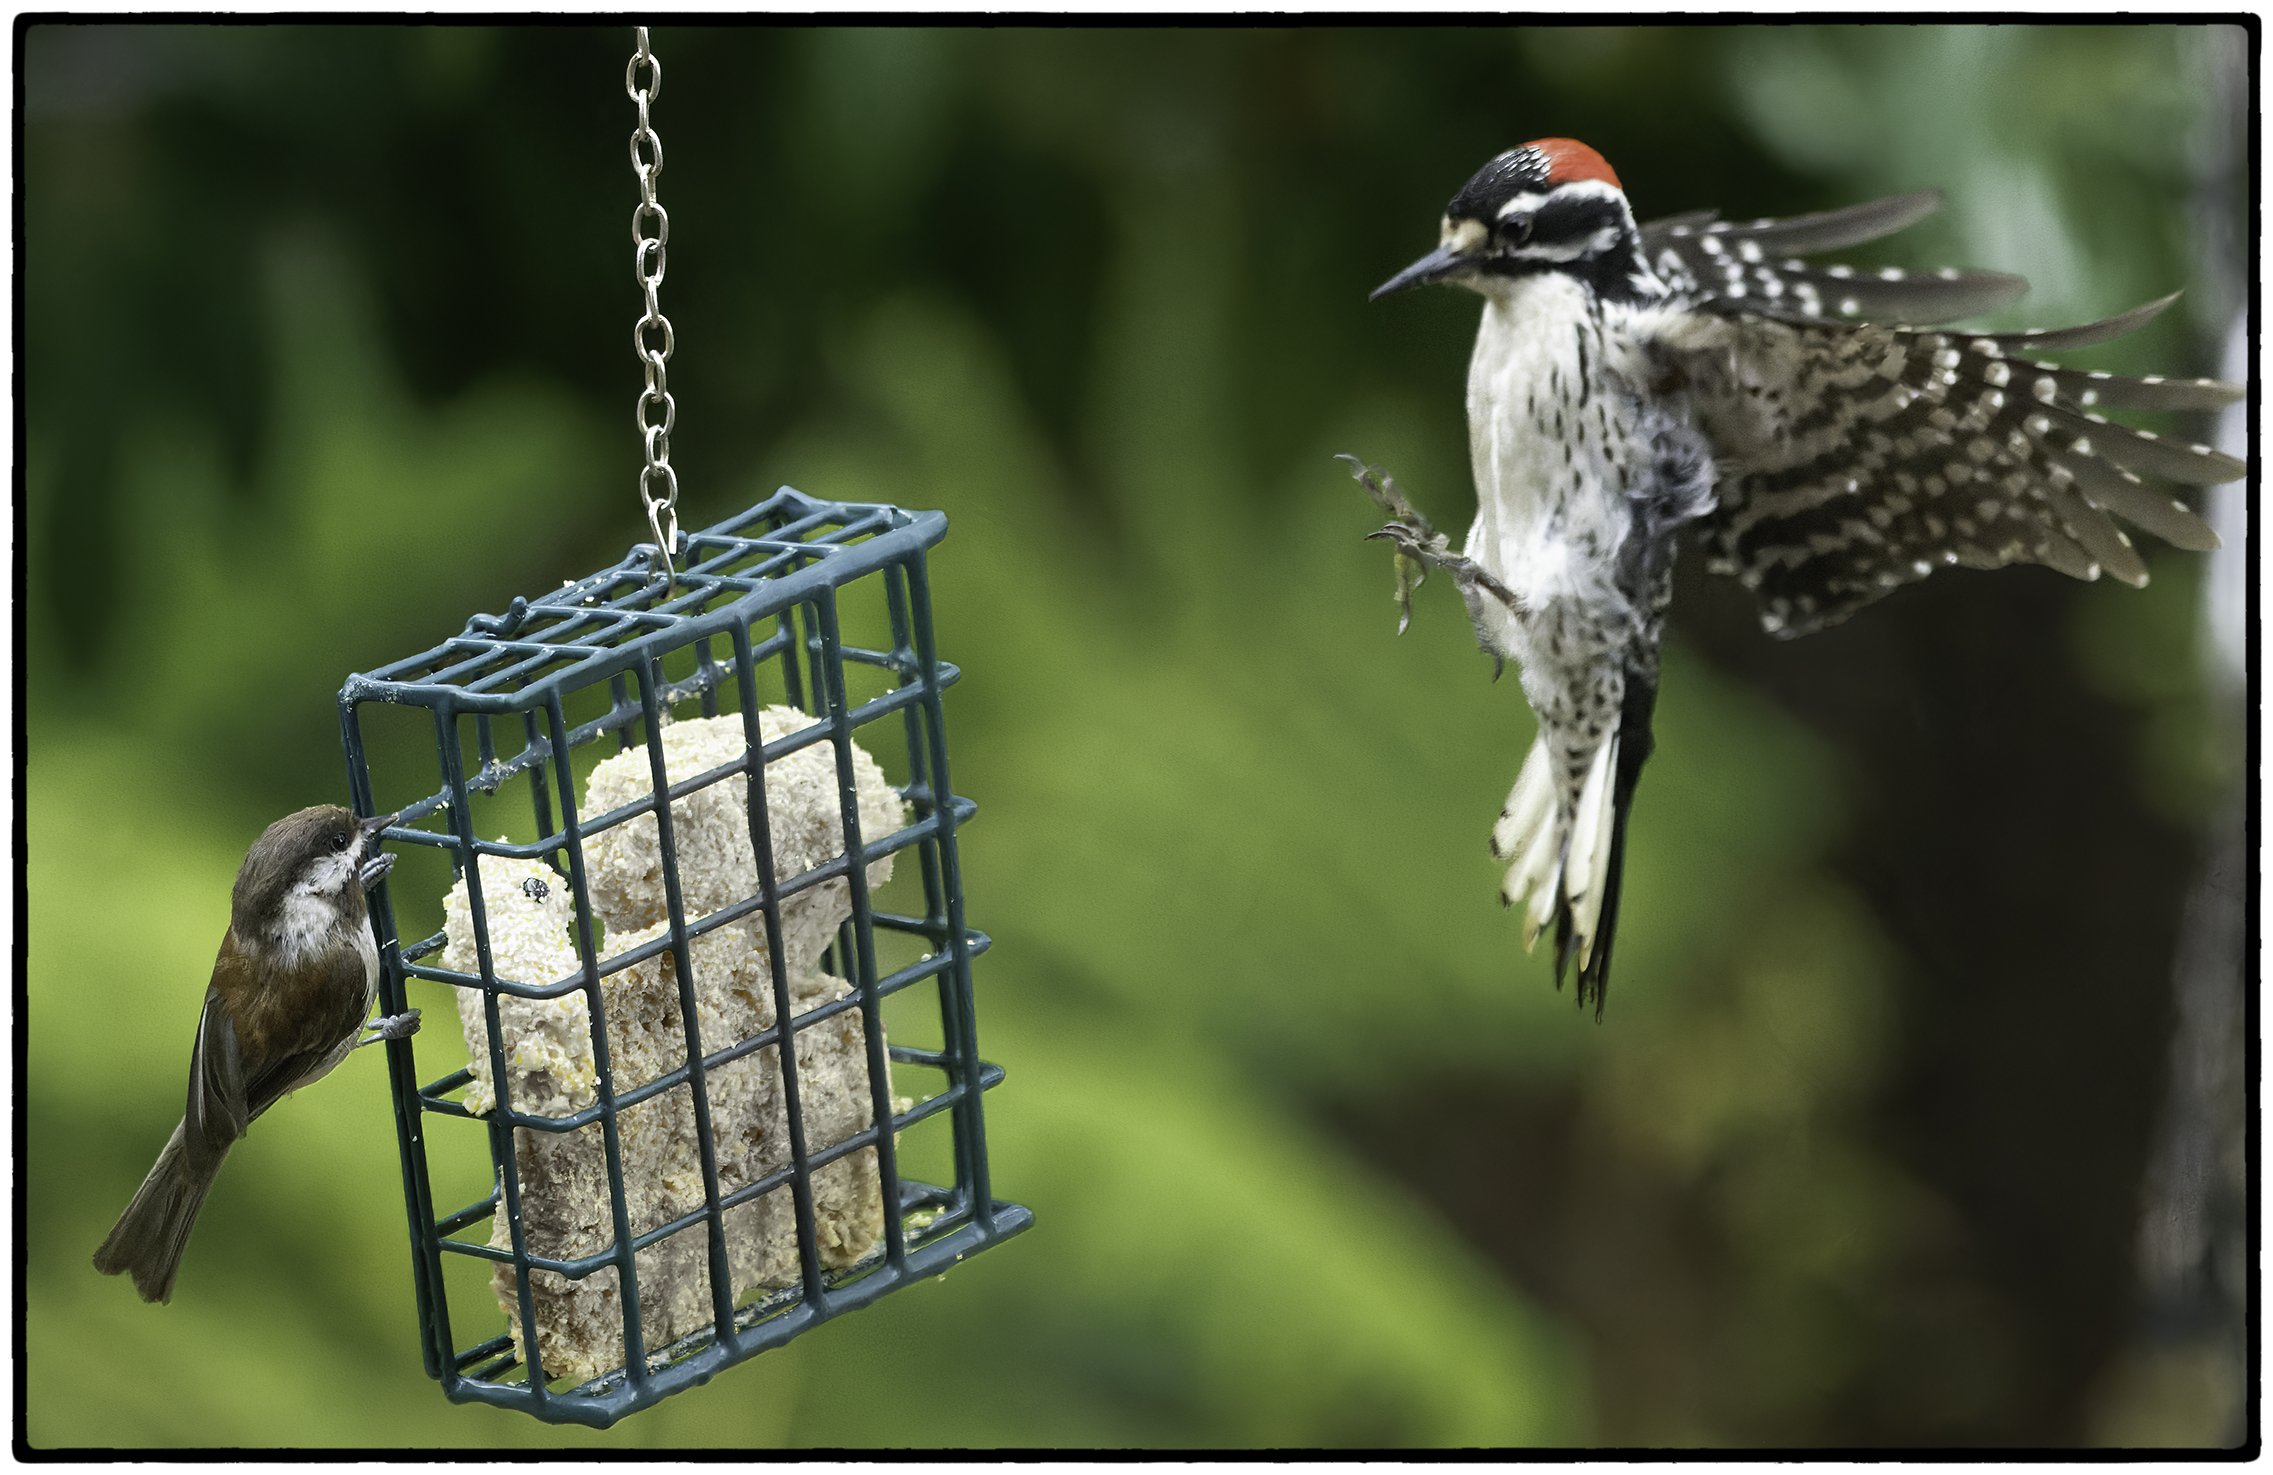 Chestnut-backed chickadee and Nutthall's Woodpecker